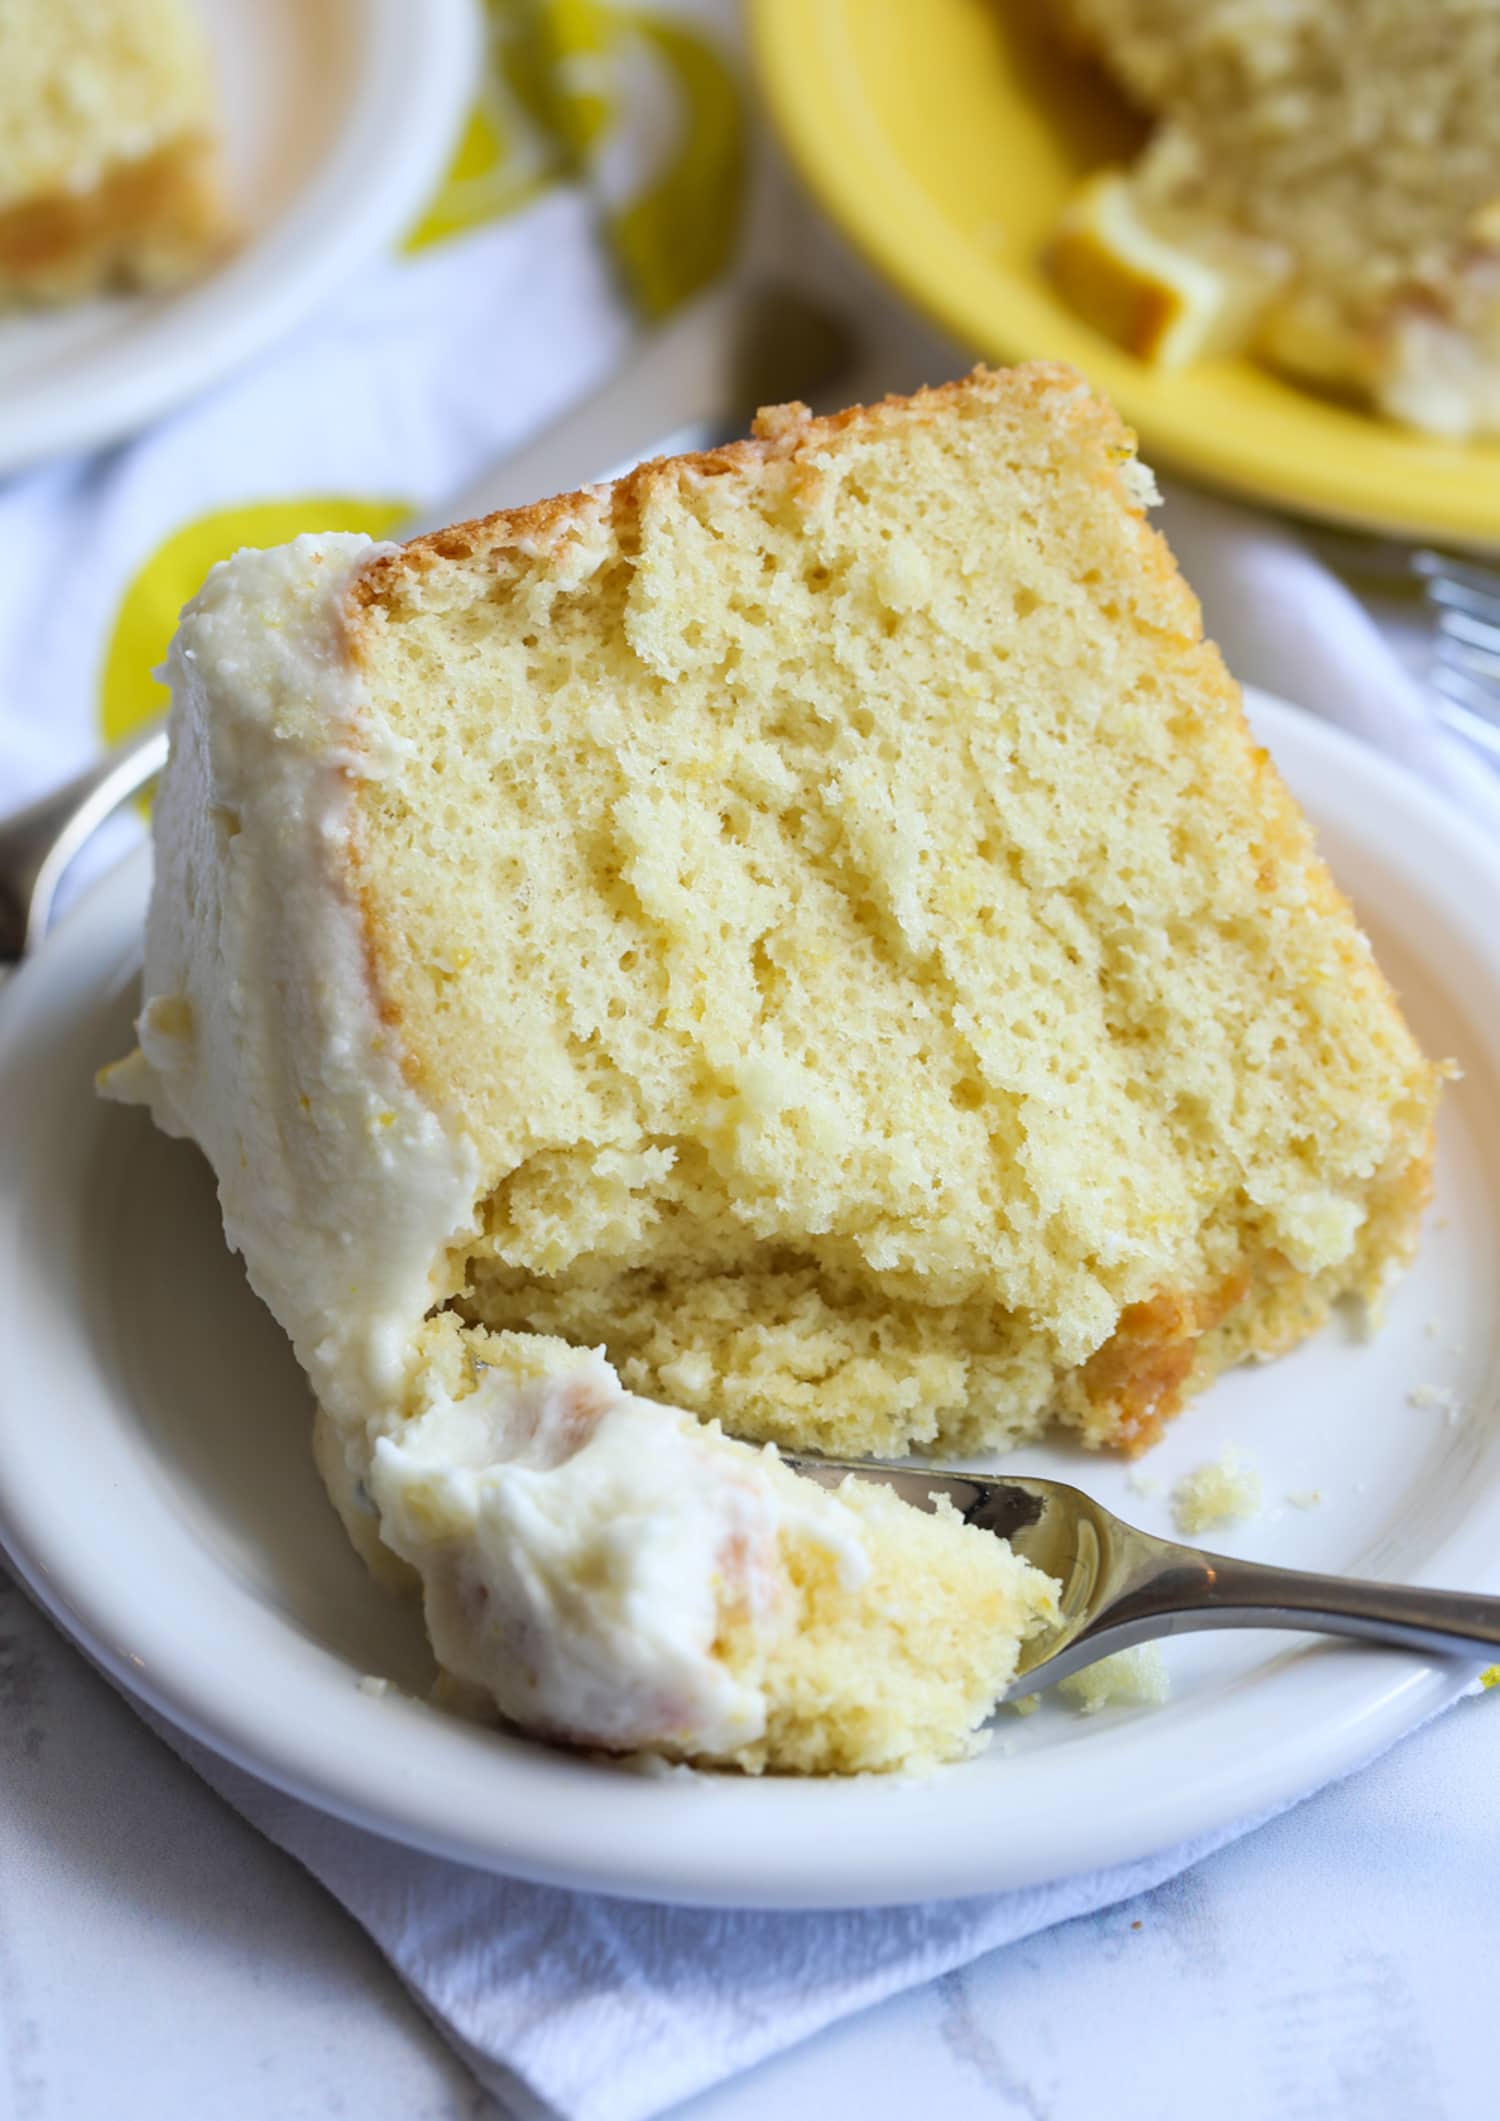 A piece of lemon cake on a plate with a forkful take out